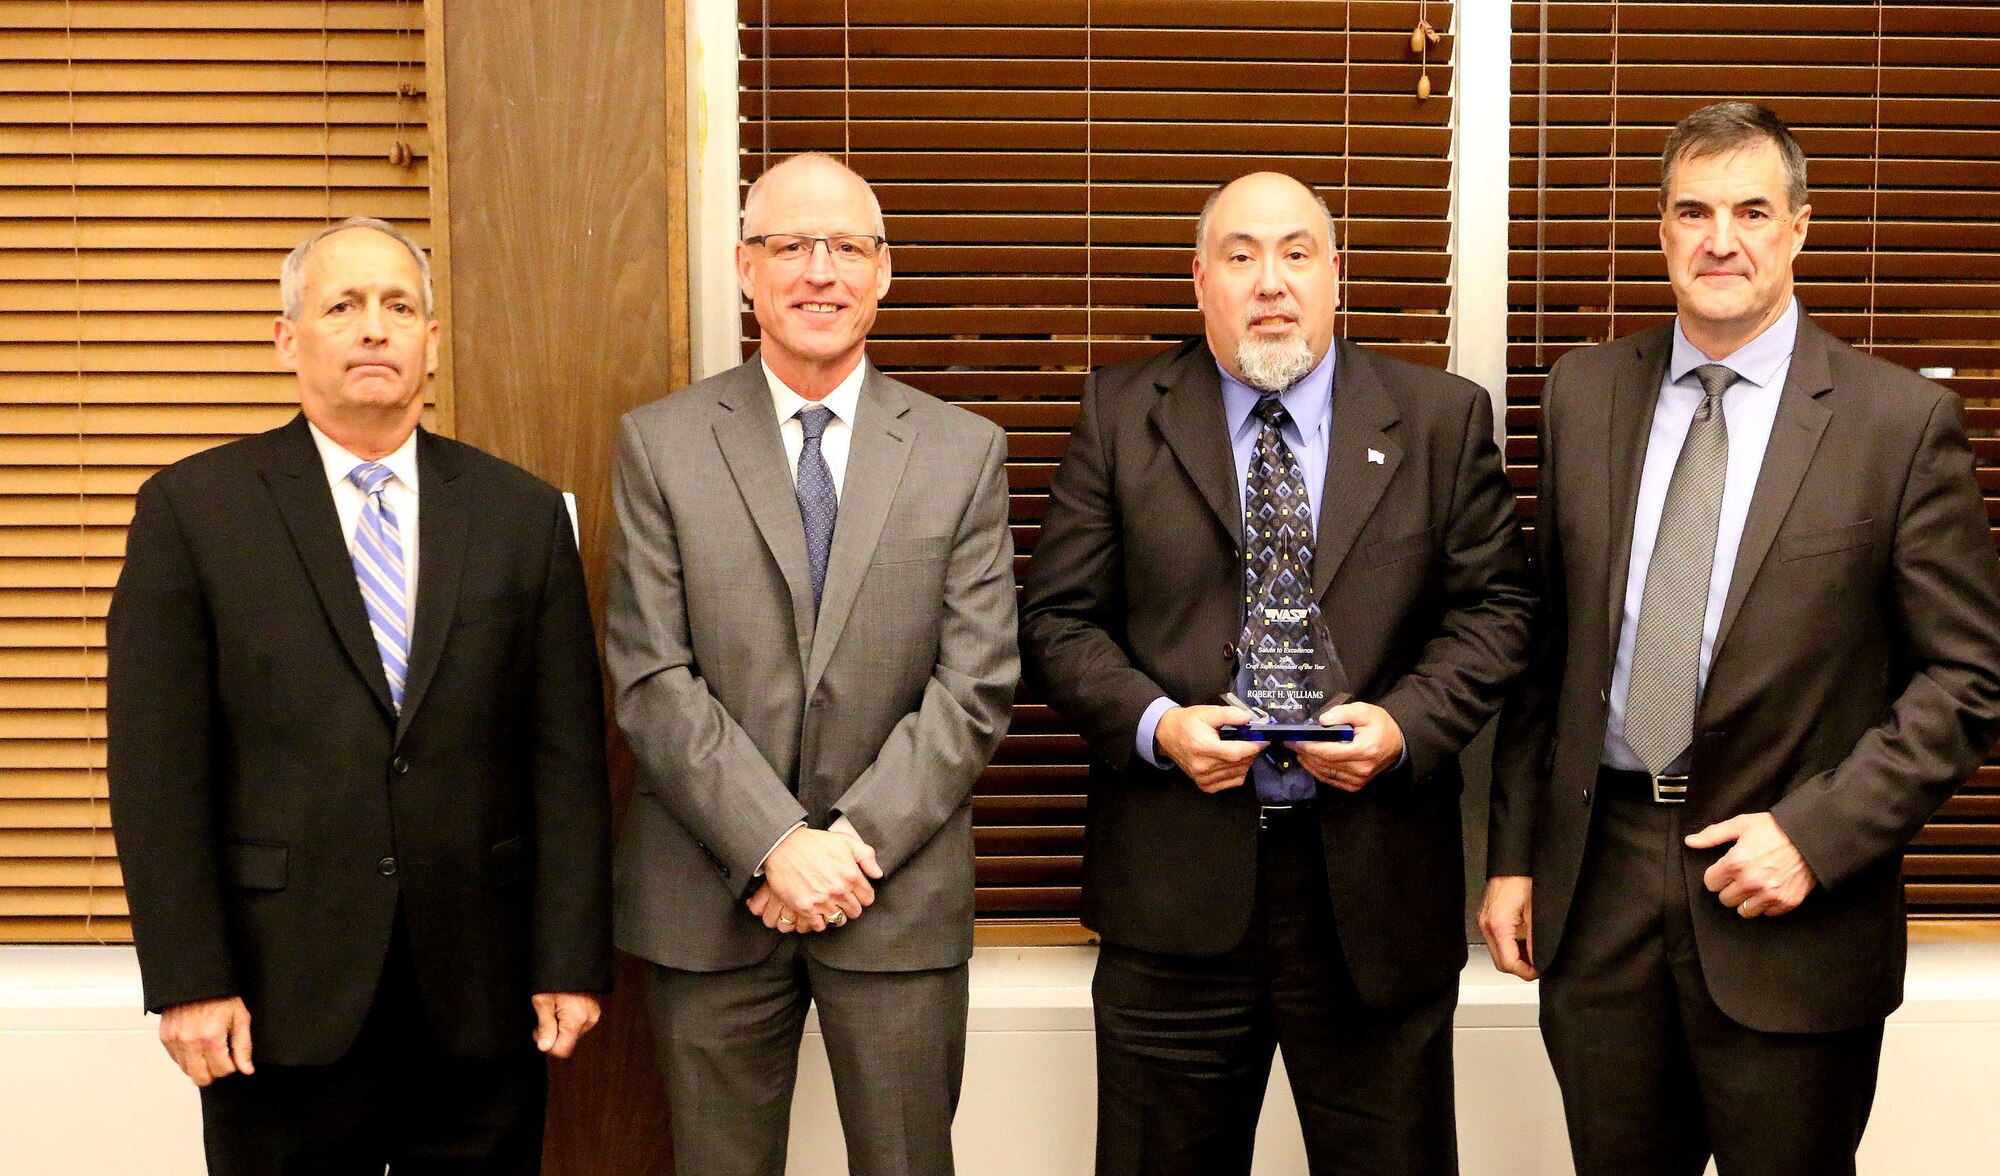 Precision Machining Supervisor Robert Williams (third from left) receives the Craft Supervisor/Superintendent of the Year Award during the National Aerospace Solutions, LLC Salute to Excellence Annual Award Ceremony Nov. 14, 2018, at the Arnold Lakeside Center, Arnold Air Force Base, Tenn. Also pictured from left is NAS Deputy General Manager Michael Belzil, NAS General Manager Richard Tighe and NAS Mission Execution Director Roderick Cregier. (U.S. Air Force photo by Bradley Hicks)